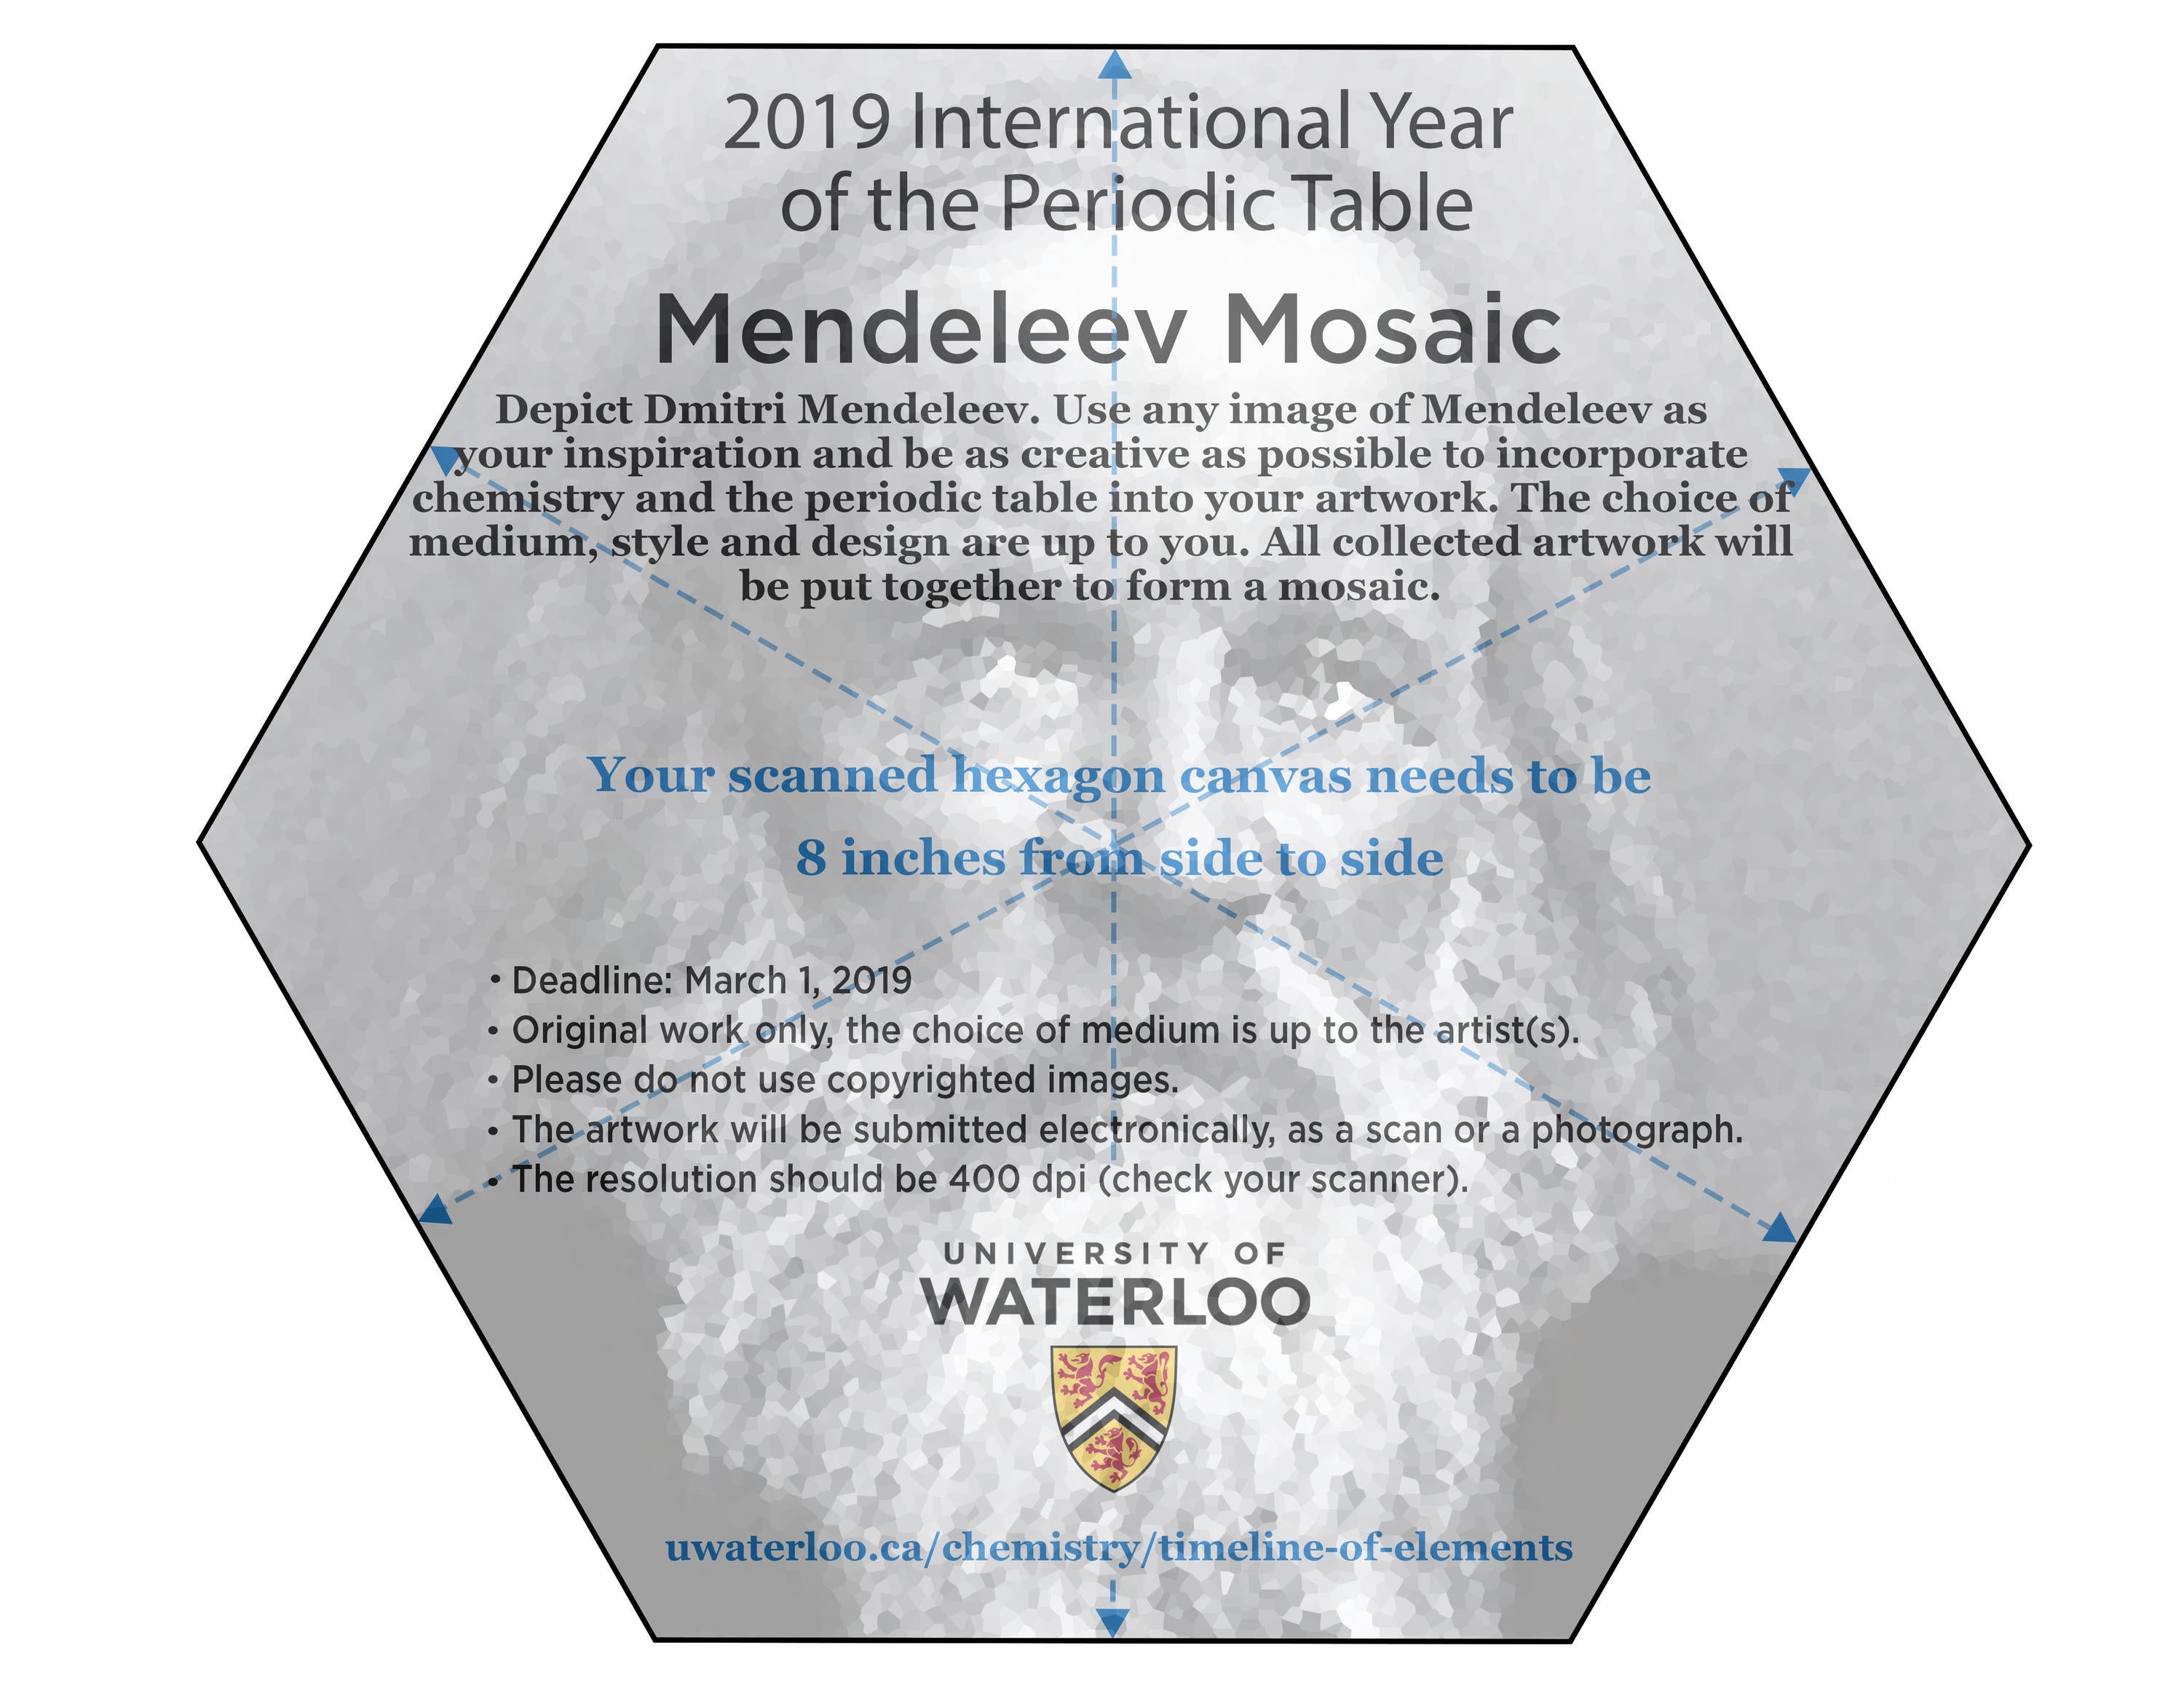 a hexagon with a black and white portrait of Mendeleev for the Mendeleev Mosaic